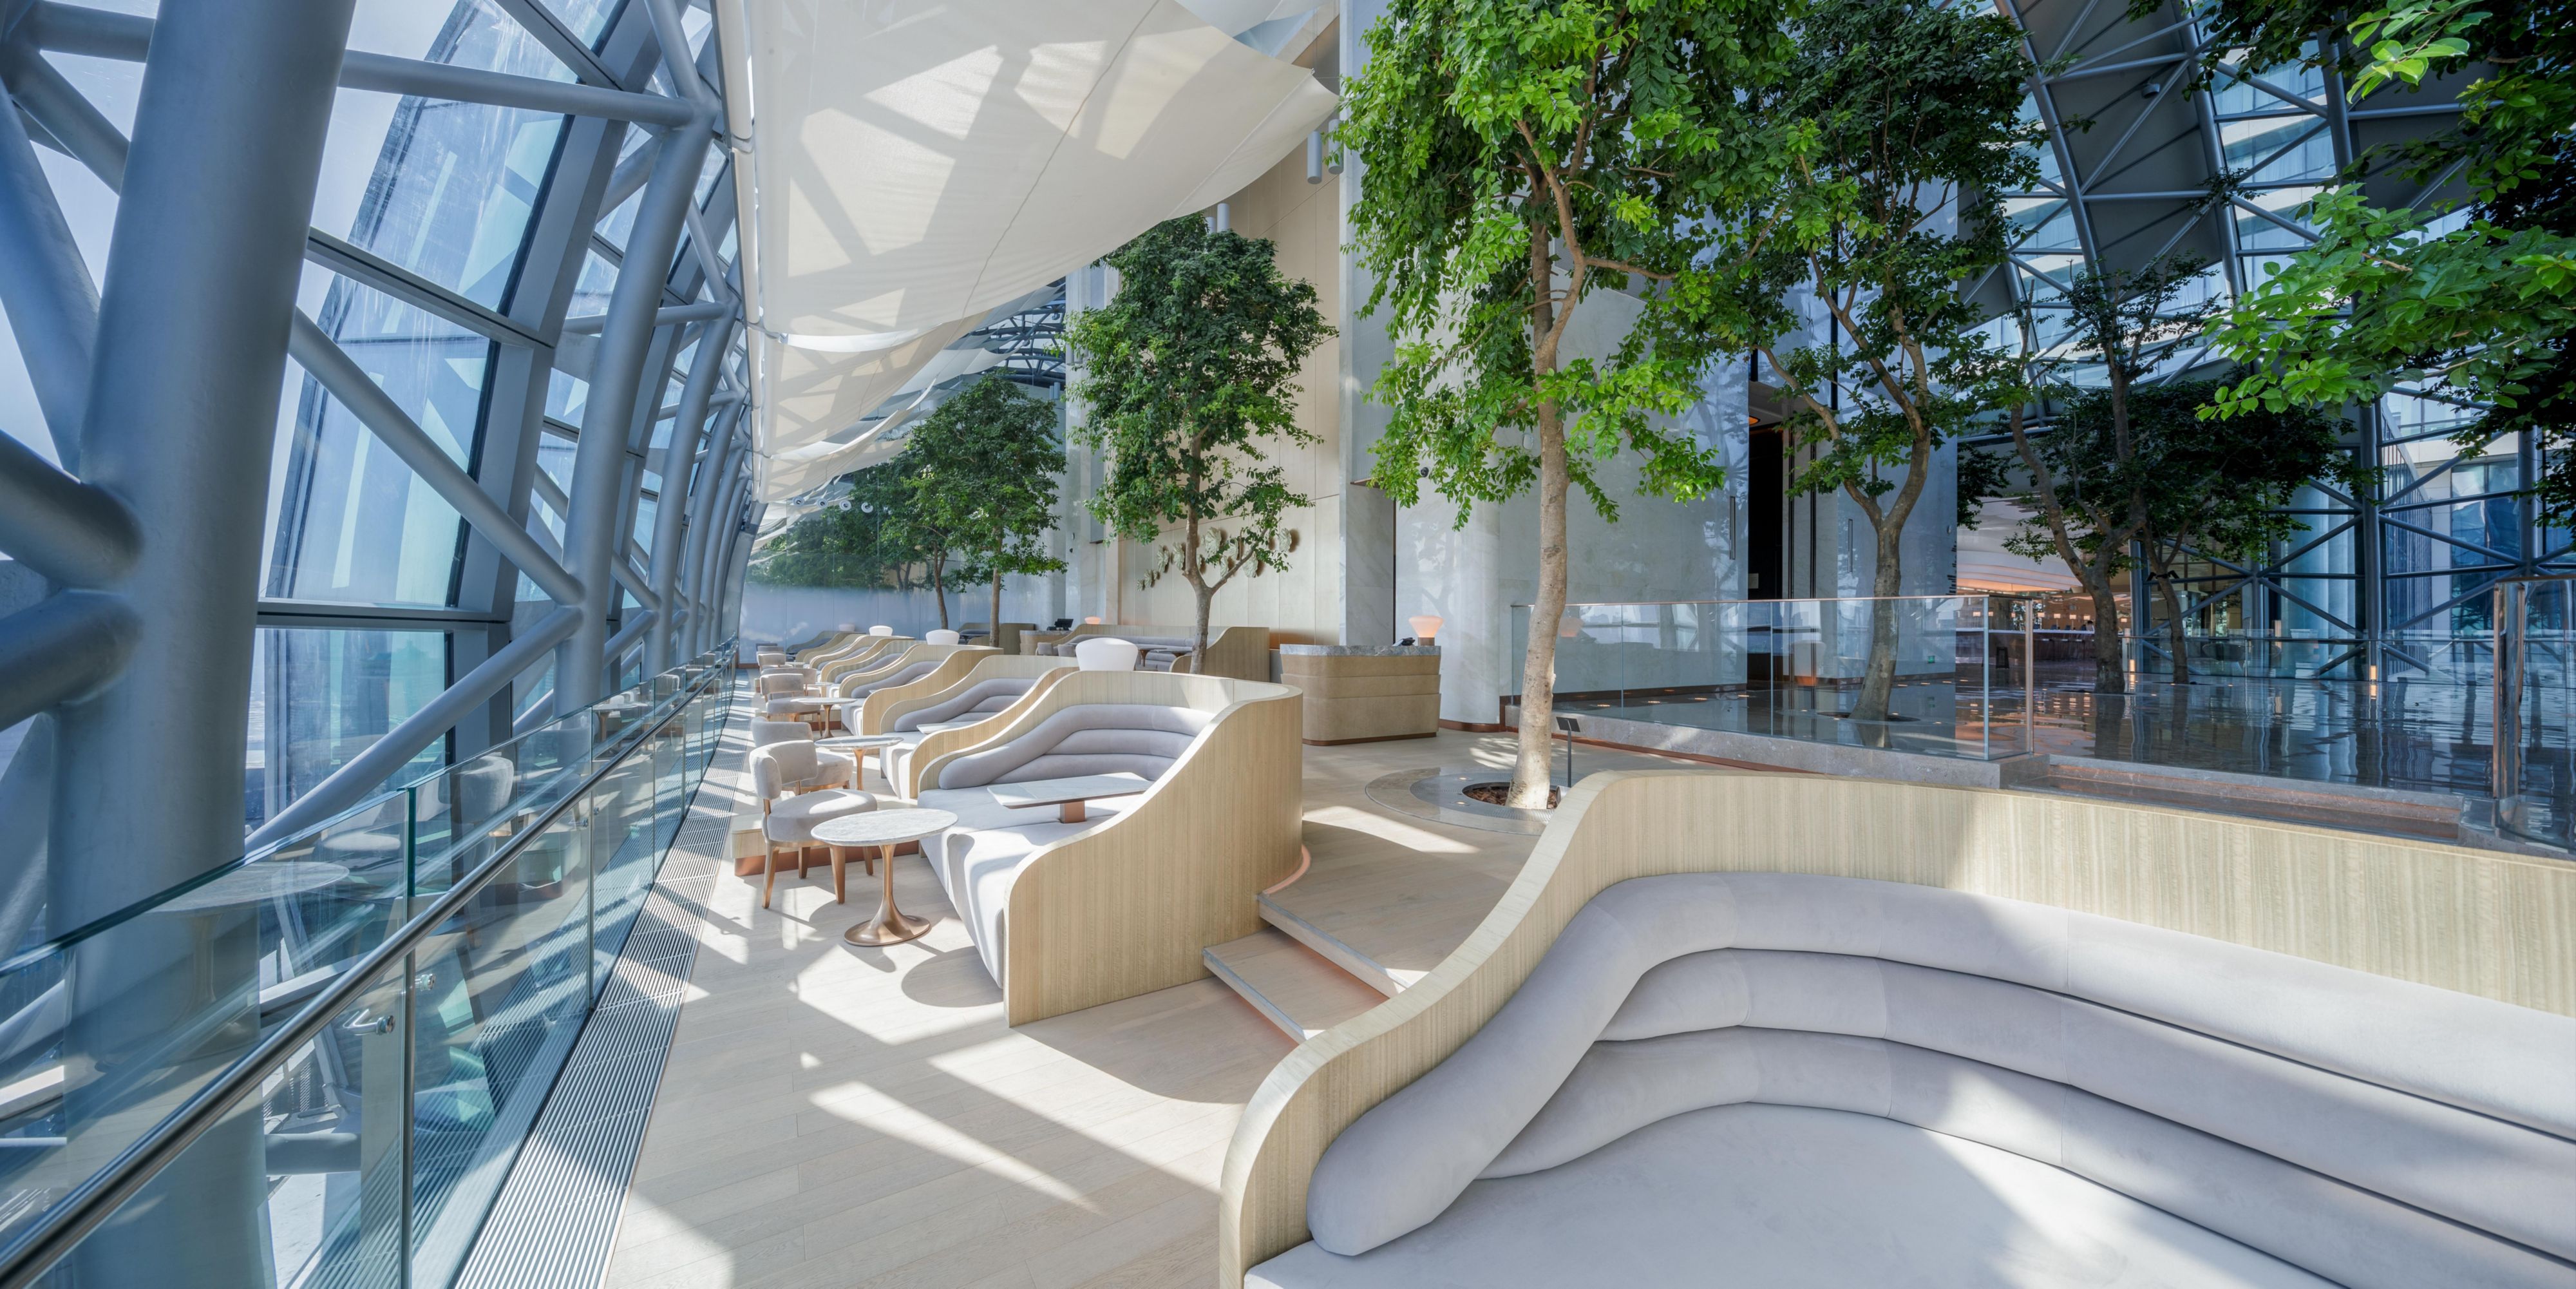 Horizon Lounge is set above the sky with a panoramic city view, where you can enjoy the acclaimed High Tea with selected teas. The lounge provides a novel botanical environment with ambient lighting under real trees and with views of the Chongqing skyline.